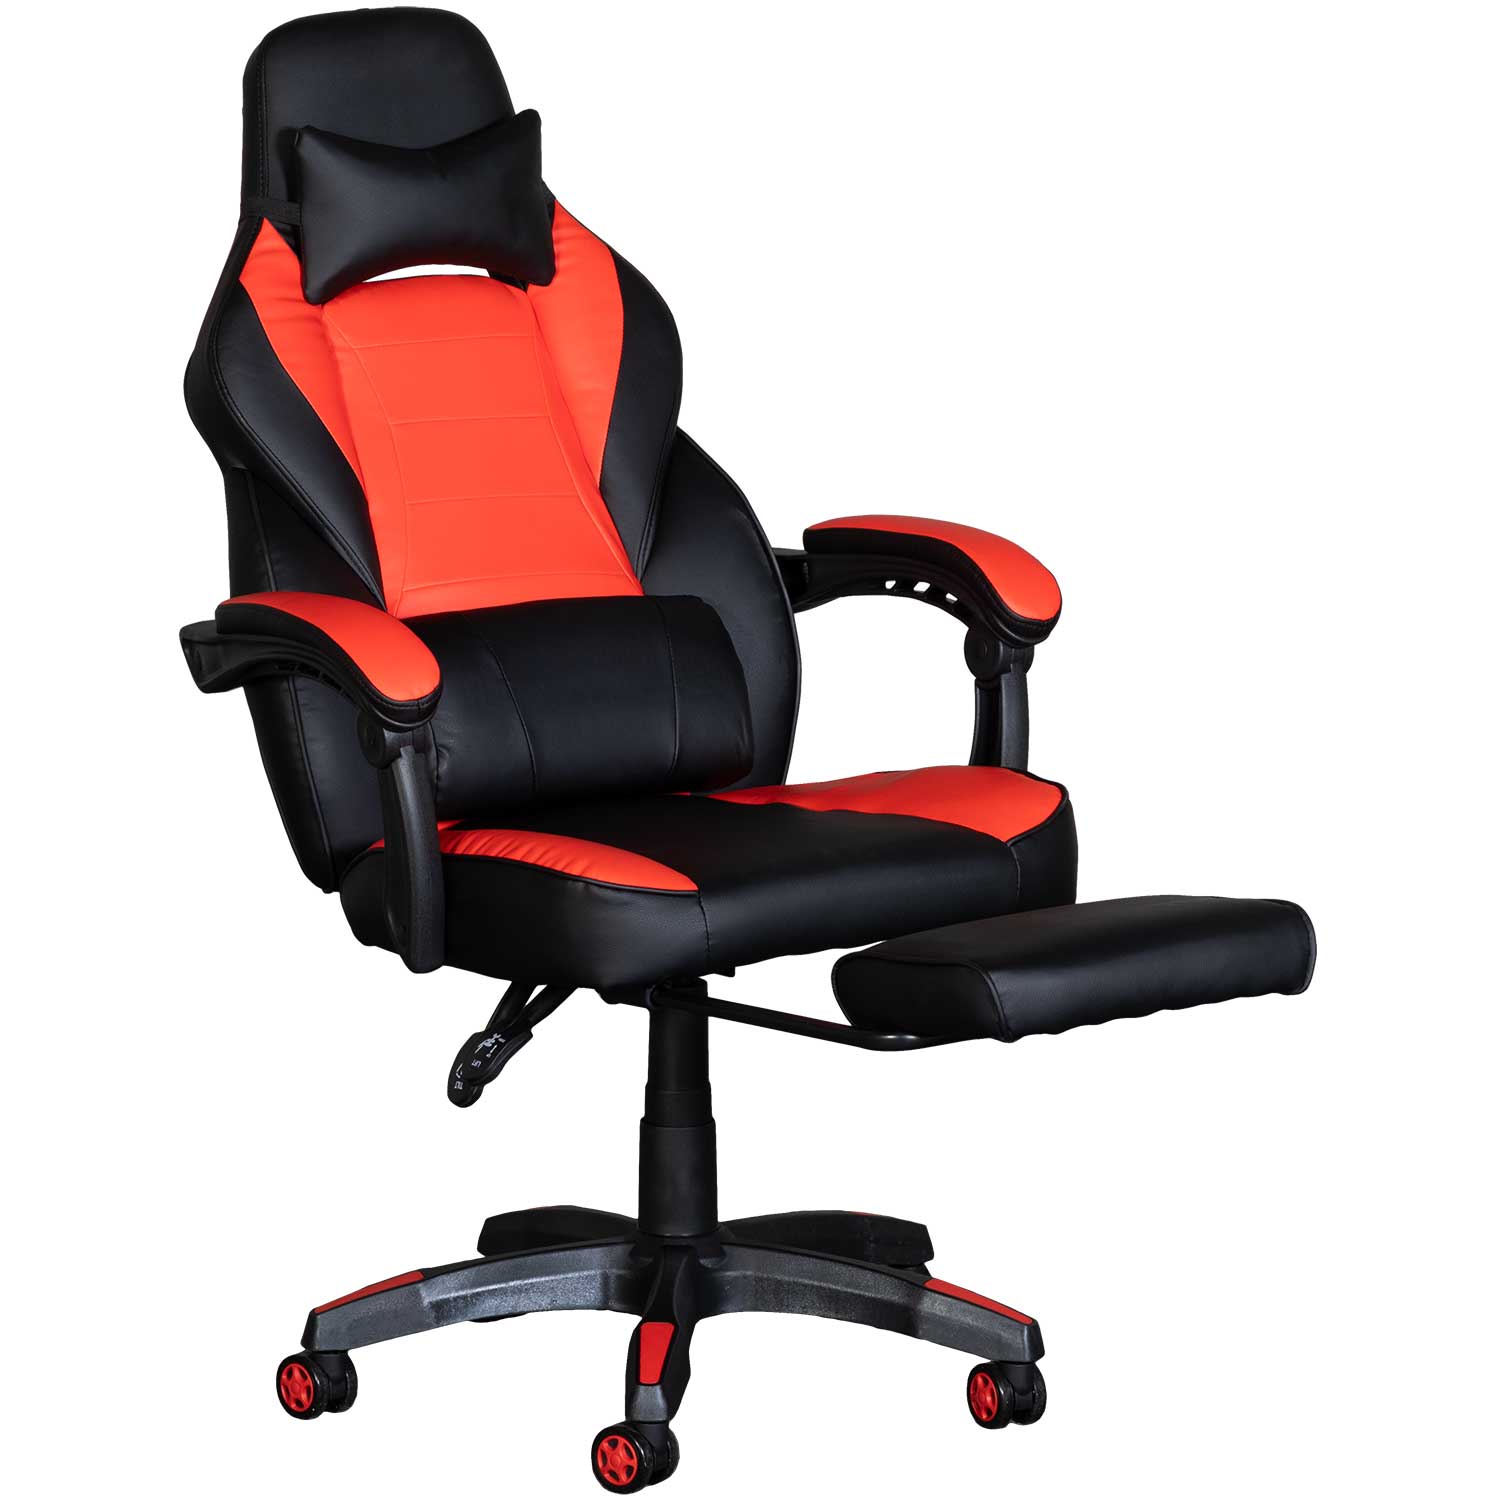 Black and Red Ergonomic Gaming Office Chair, 2334-RD